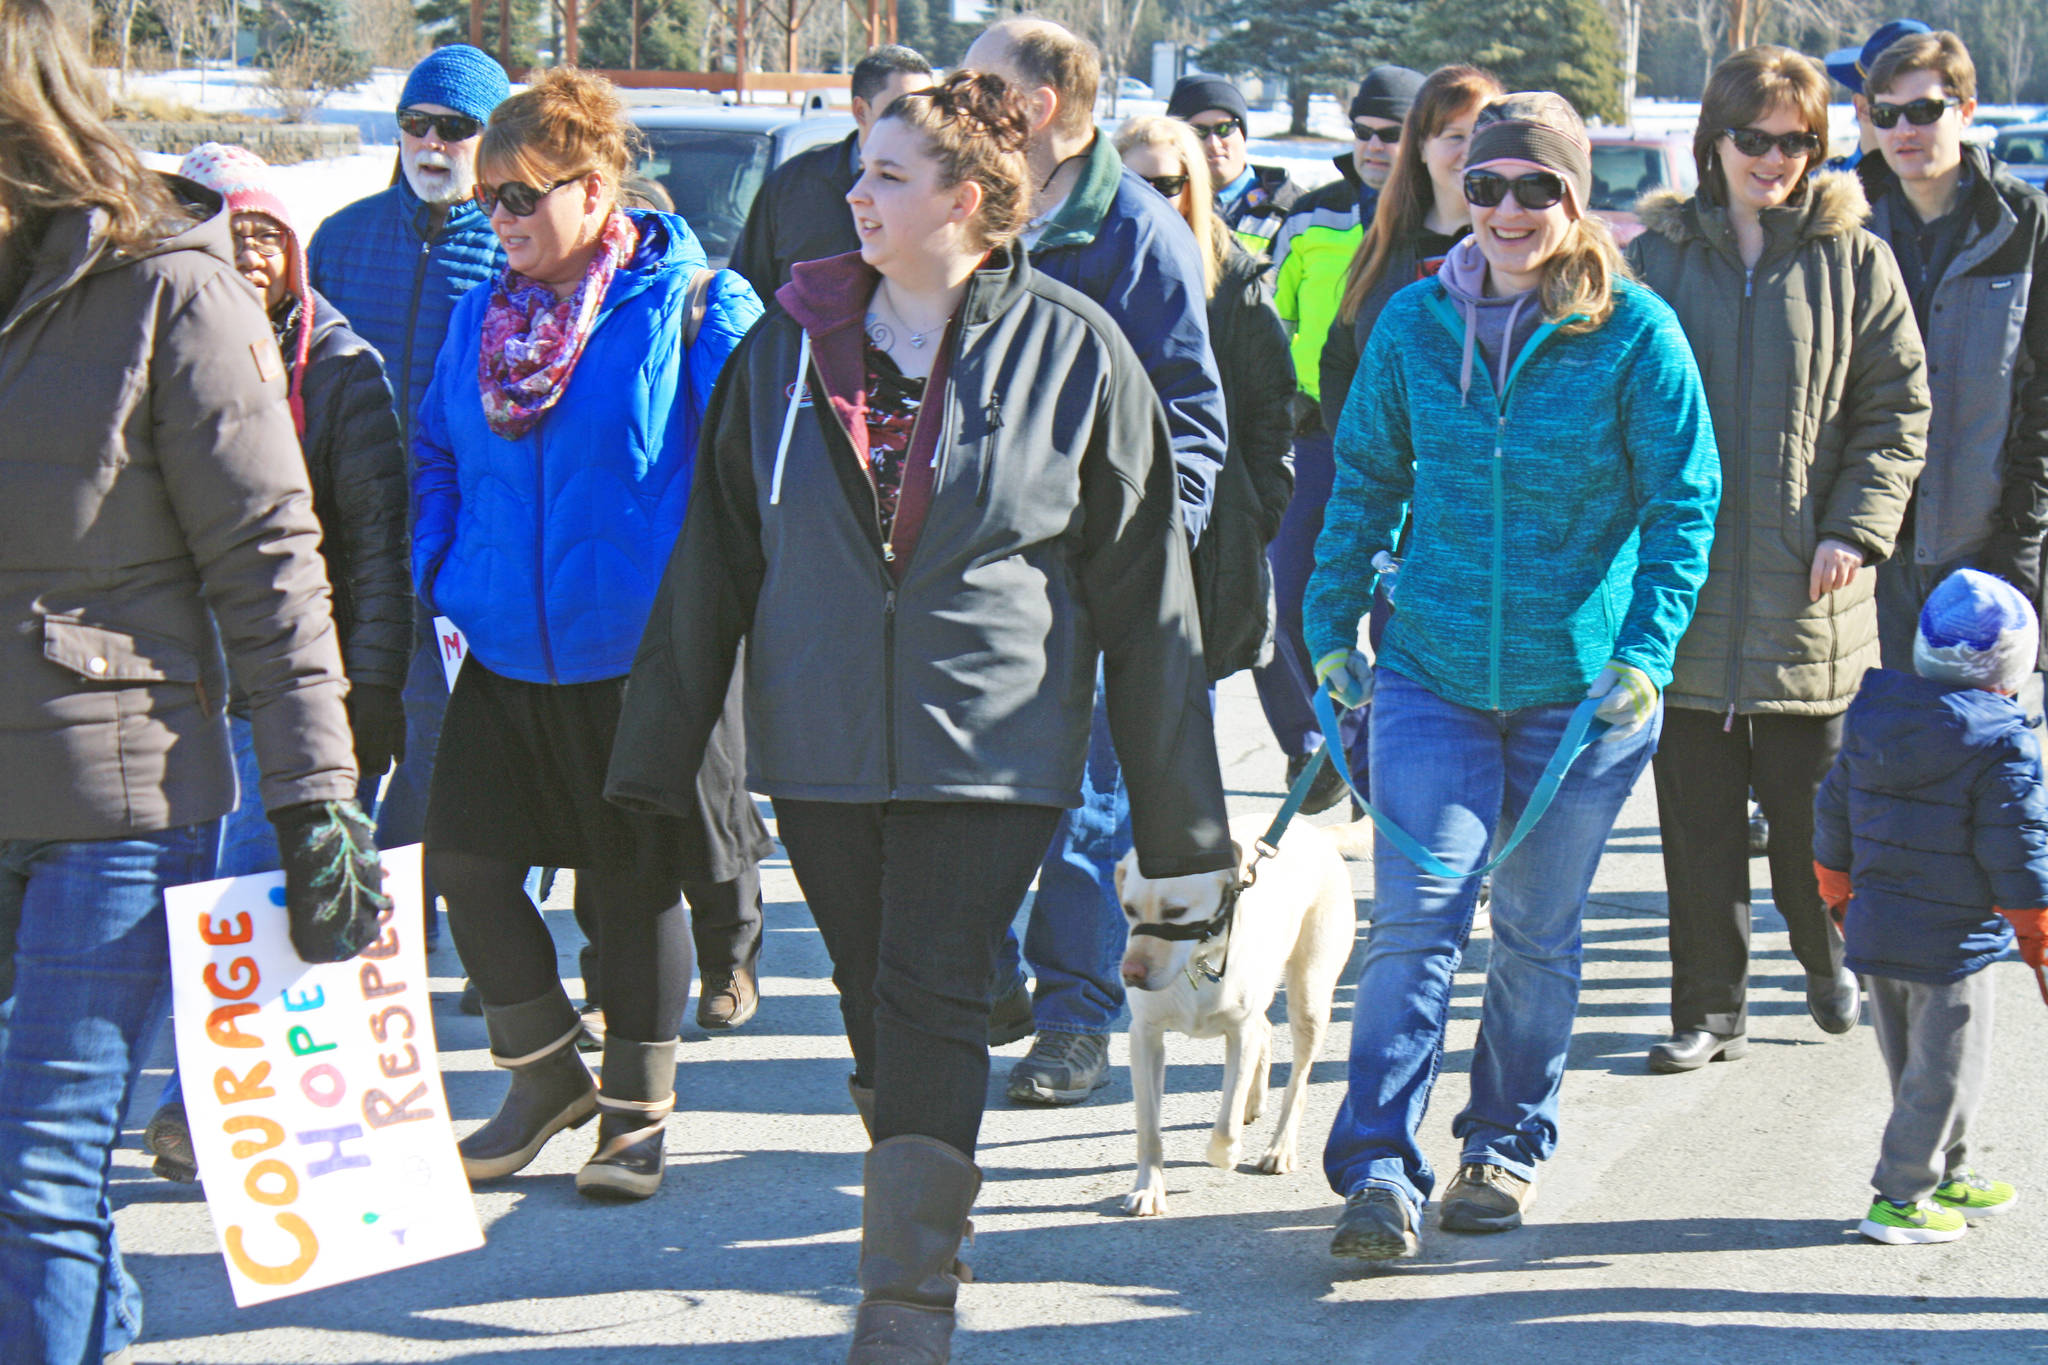 Marchers make their way along Frontage Road to the Kenai Visitor and Cultural Center as part of the Alaskans Choose Respect Awareness Event, hosted by the LeeShore Center on March 28. The event aimed to bring awareness to the issue of domestic violence and sexual assault. (Photo by Erin Thompson/Peninsula Clarion)